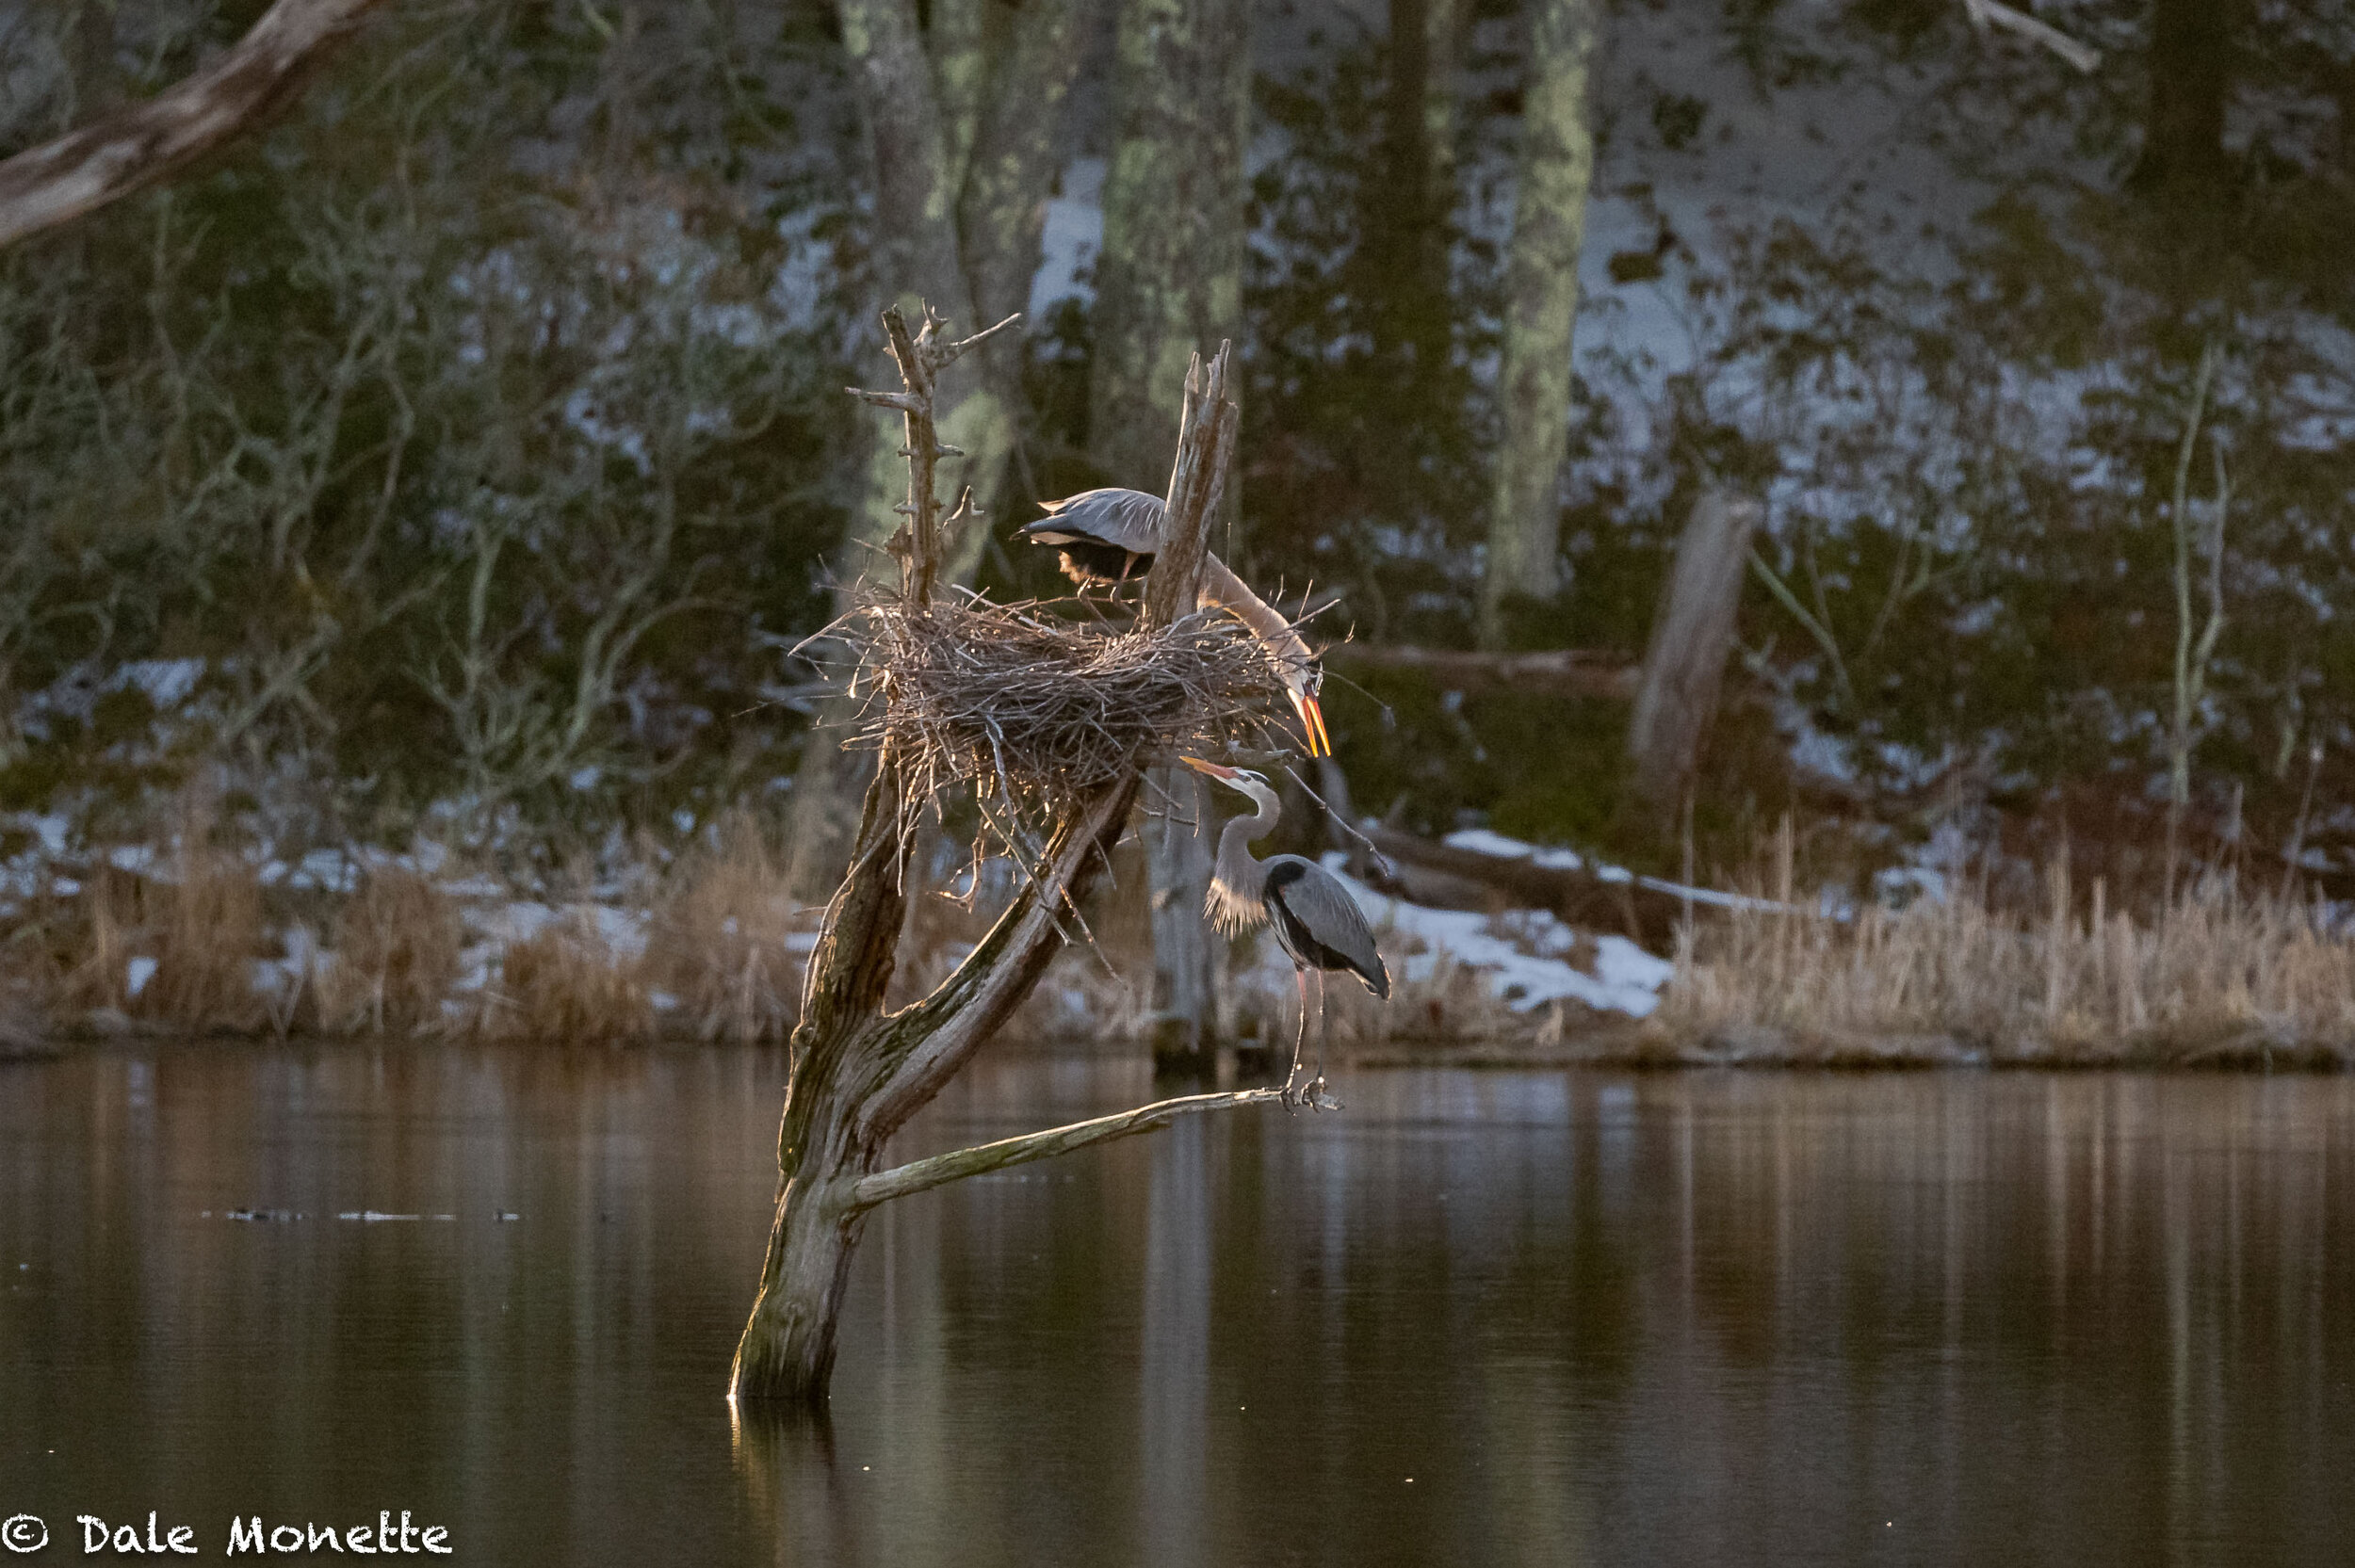   My favorite day in early spring is when the great blue herons arrive at the local rookery. The guys were here for the first time this morning (3/25/20). The other local rookery still has no tenants yet !  Any day now though.   